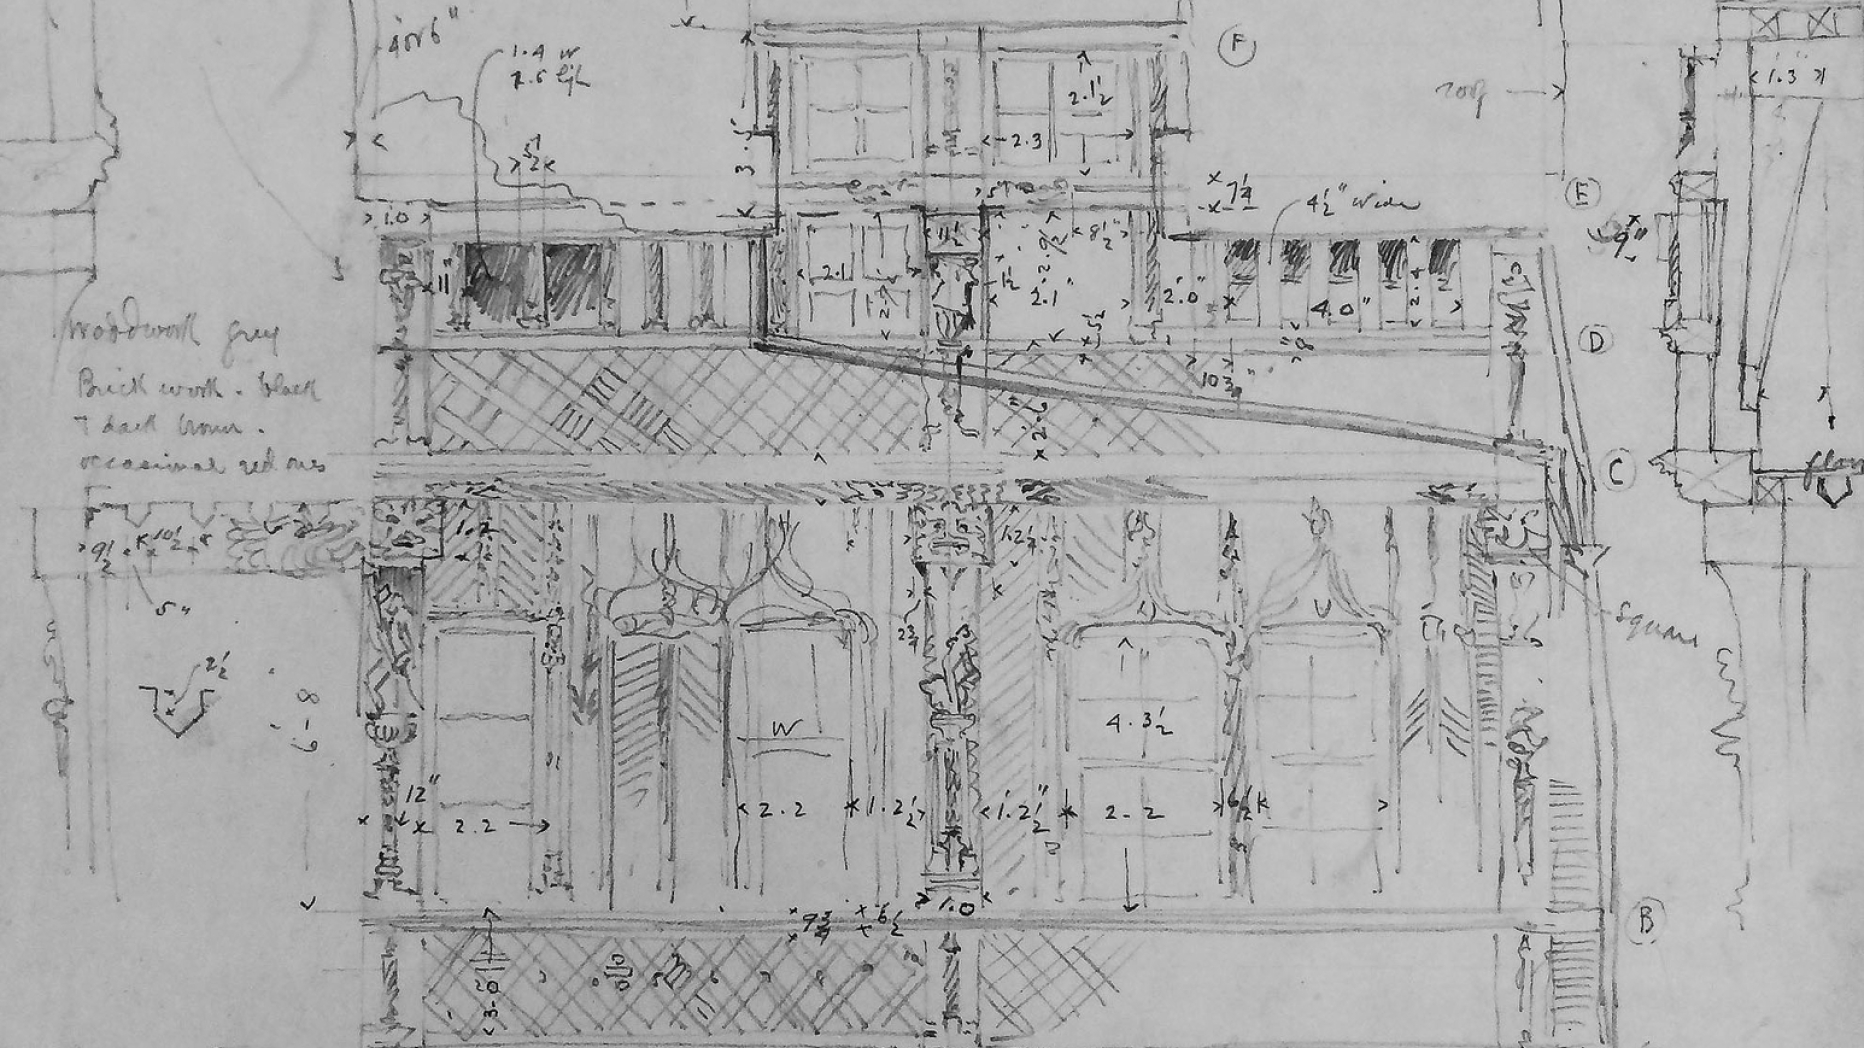 Blueprint sketch of two story house with balcony and widow's watch